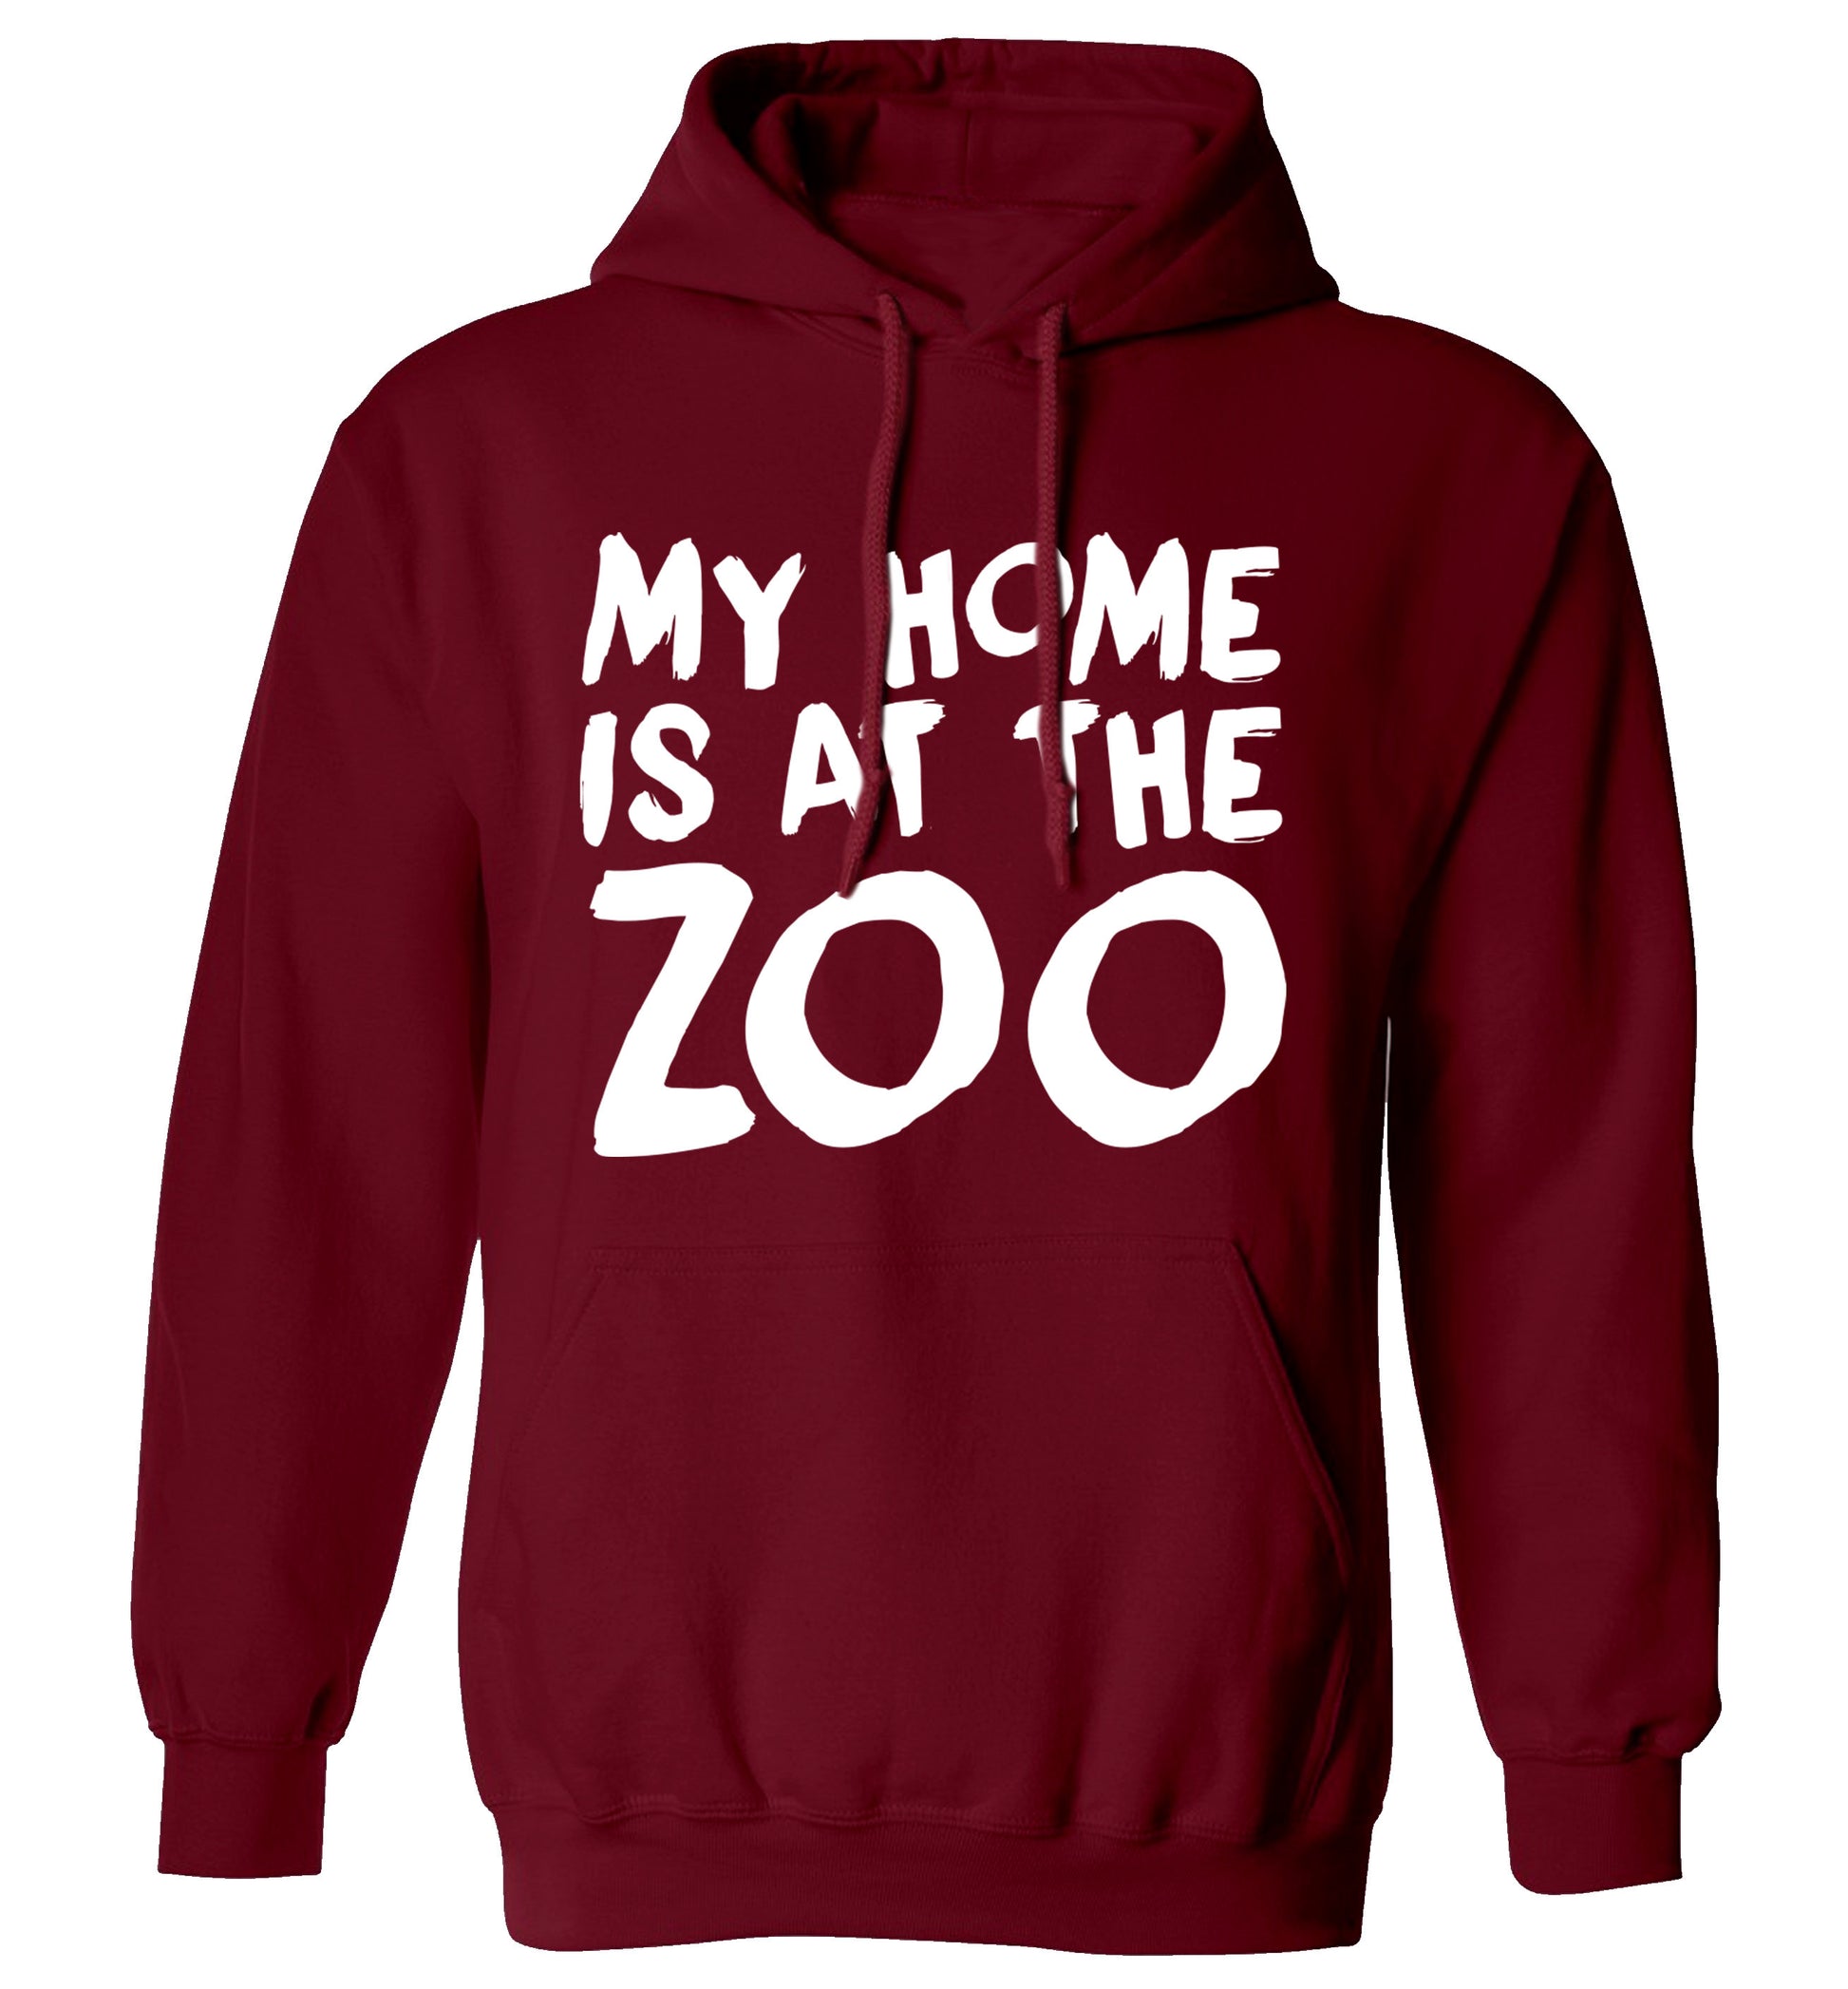 My home is at the zoo adults unisex maroon hoodie 2XL